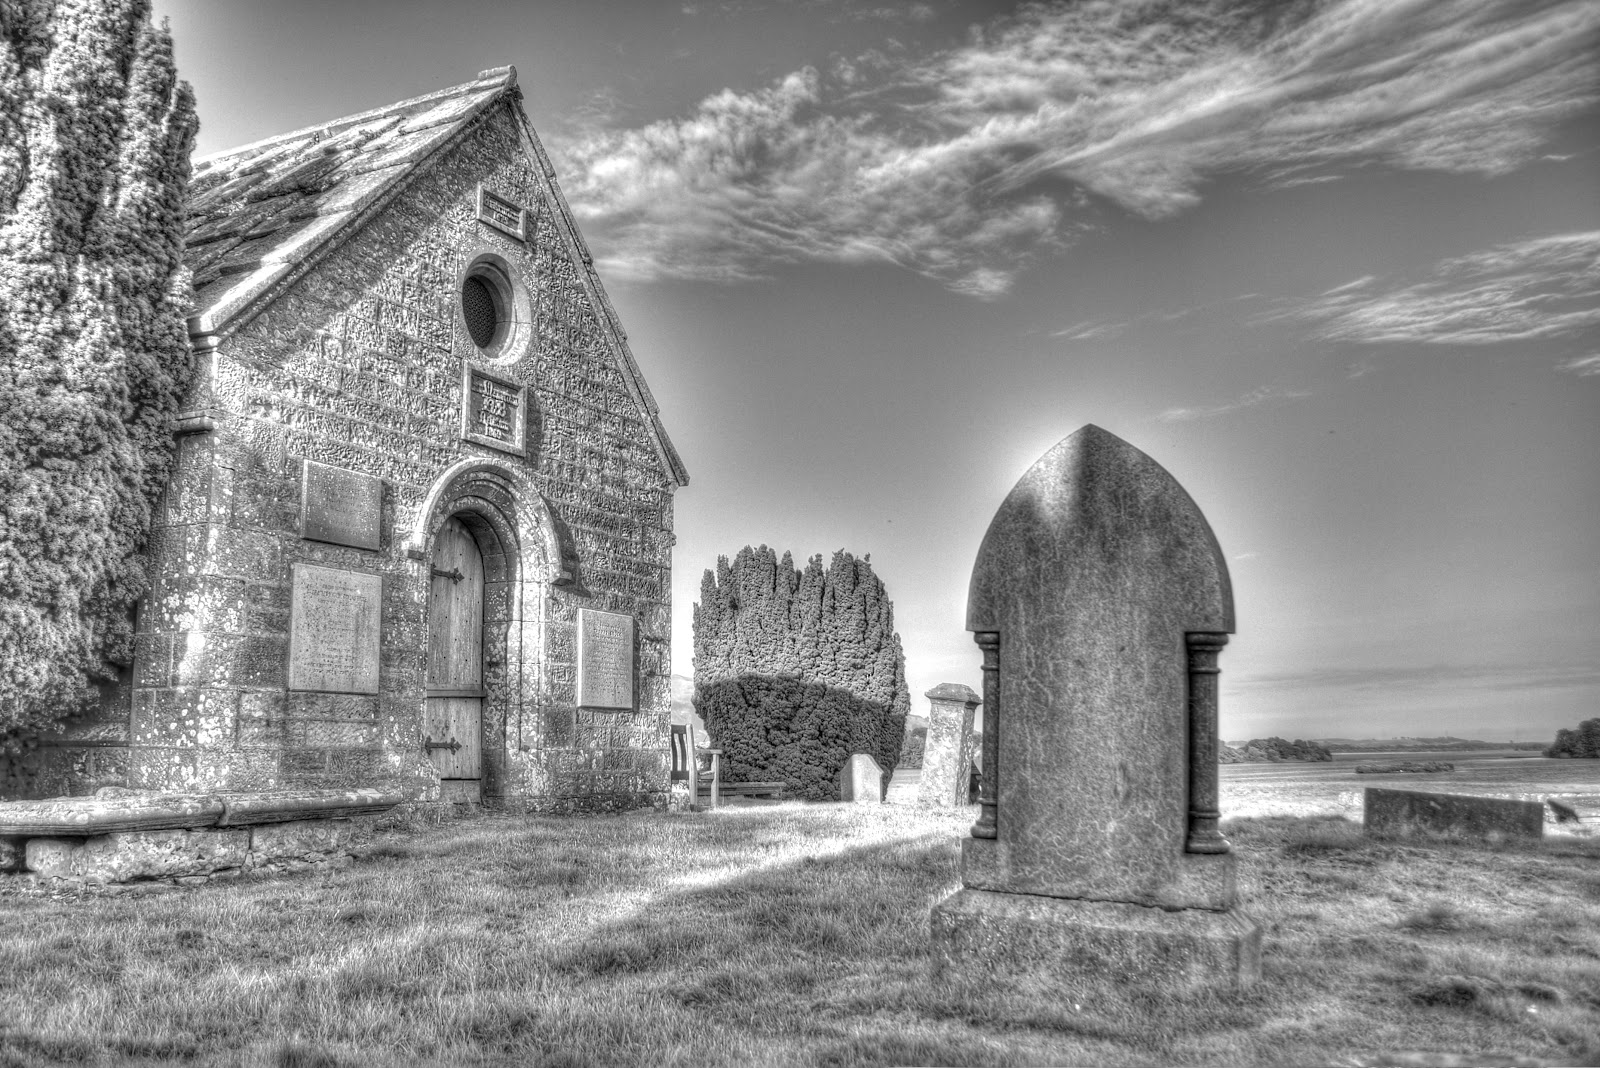 a church in front of a graveyard is shown